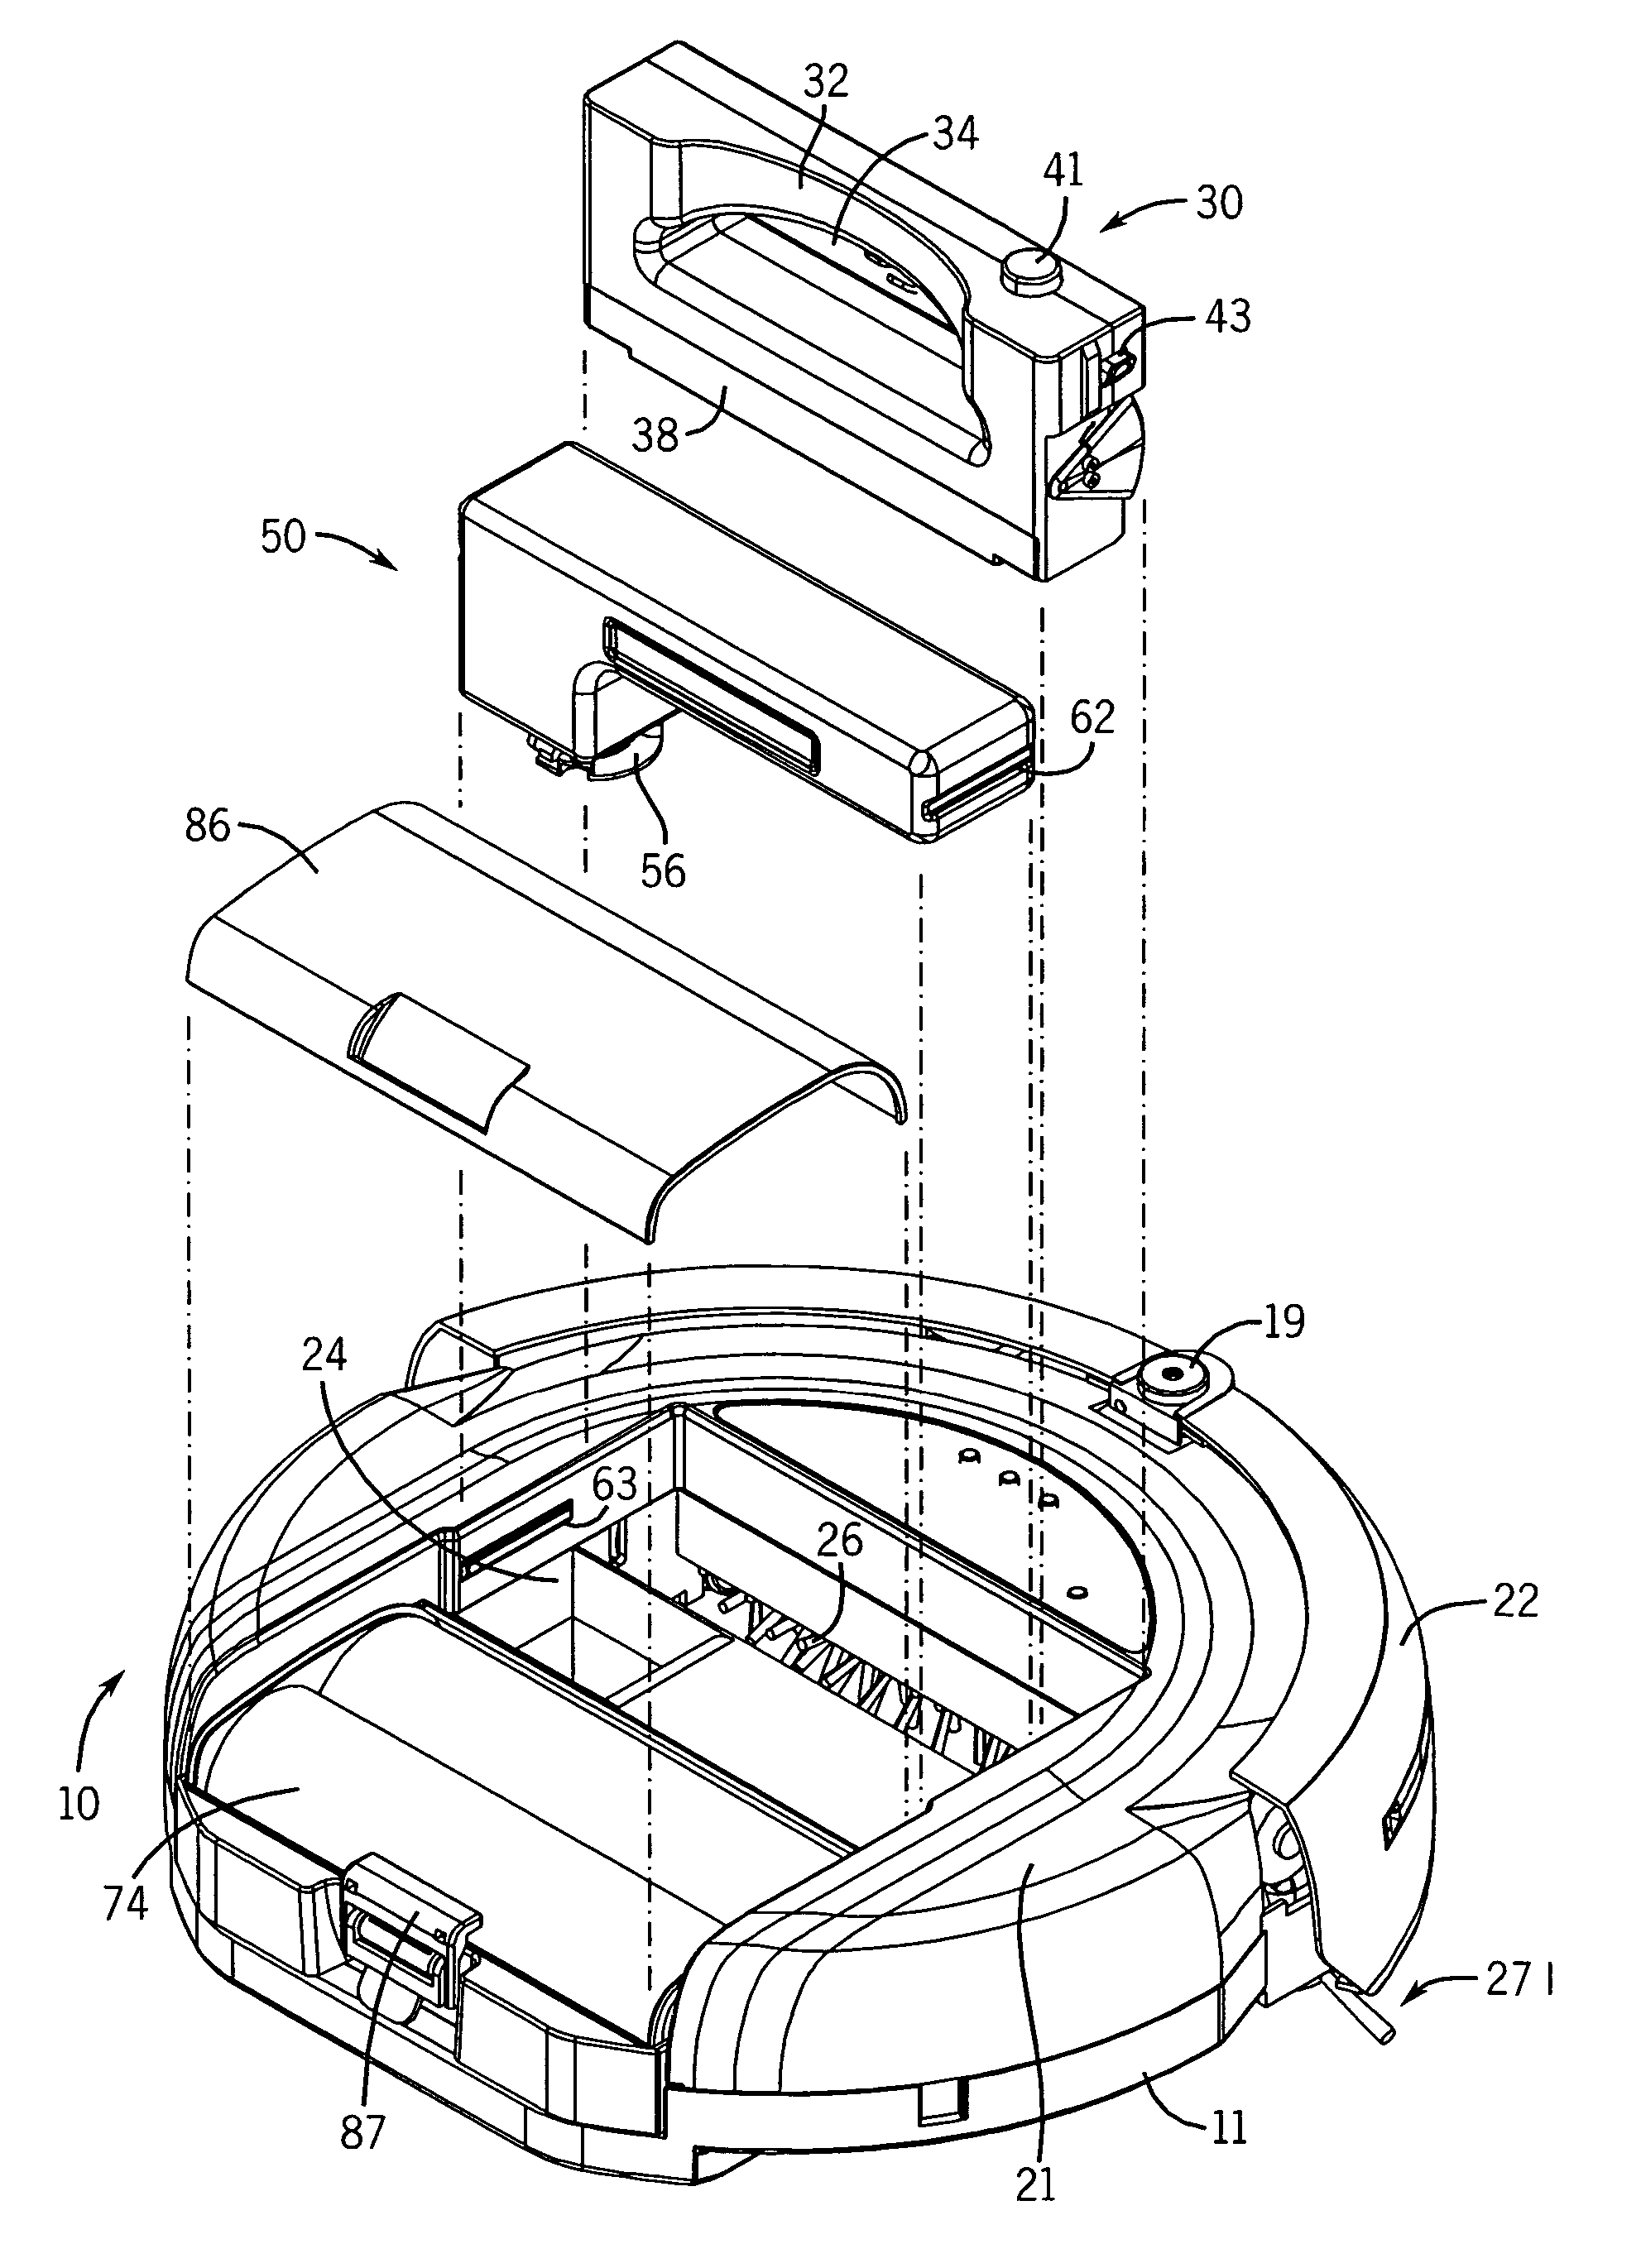 Surface treating device with top load cartridge-based cleaning system